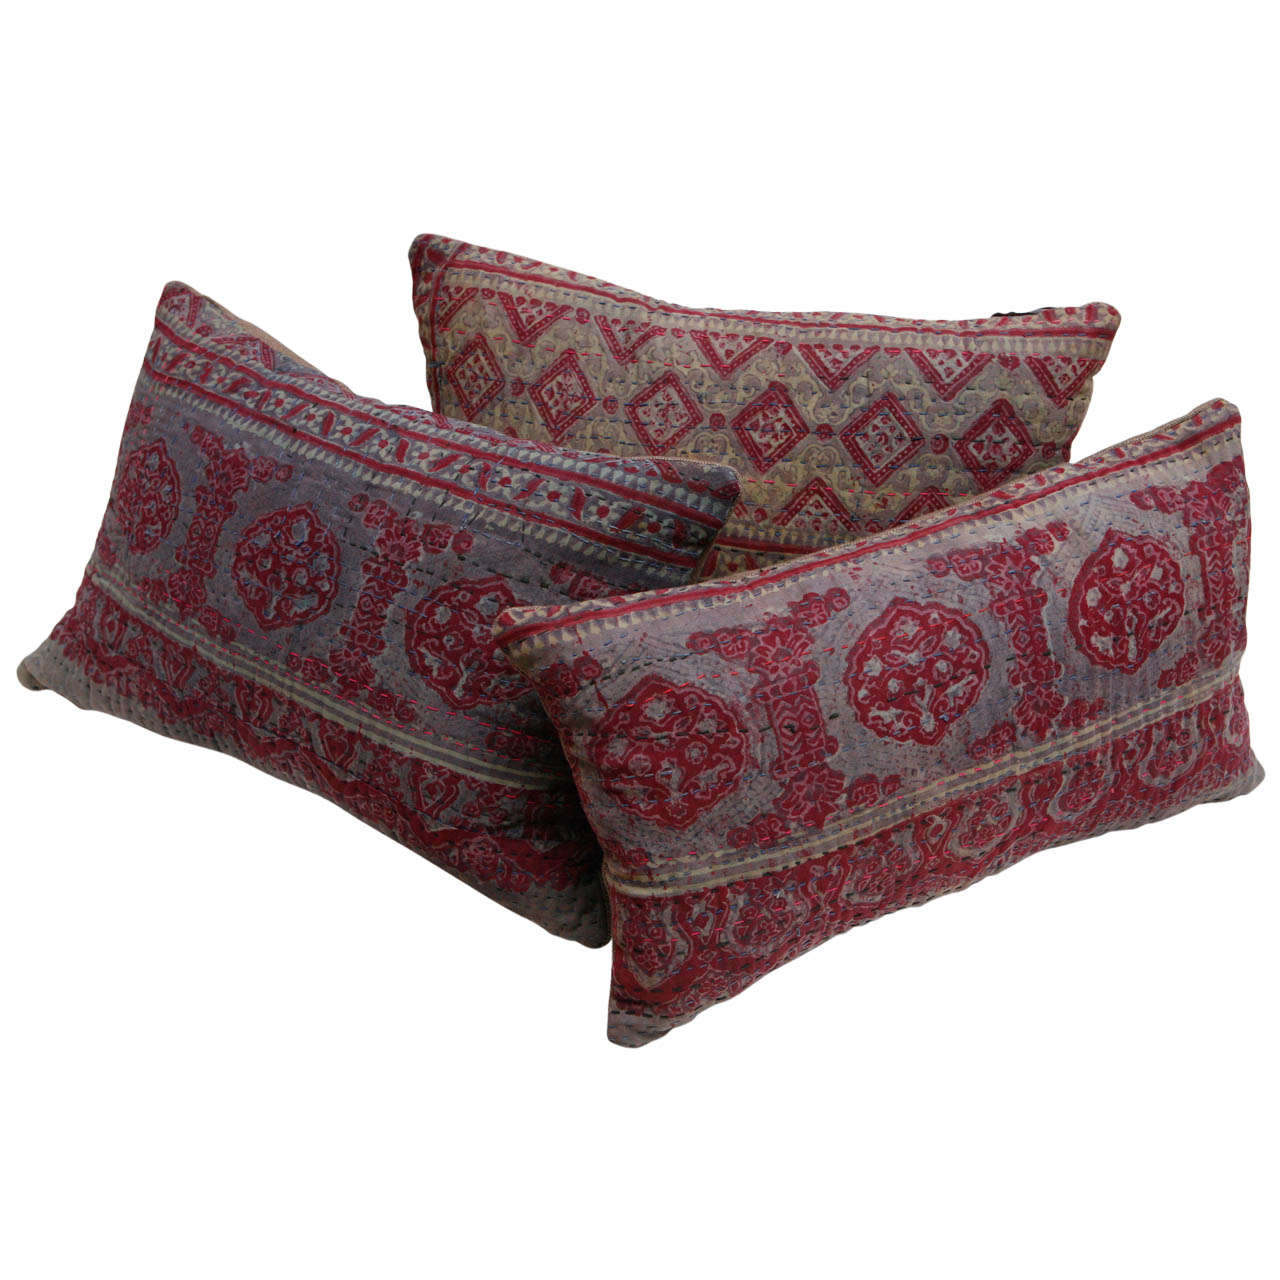 Quilted Indian Block Print Pillows.